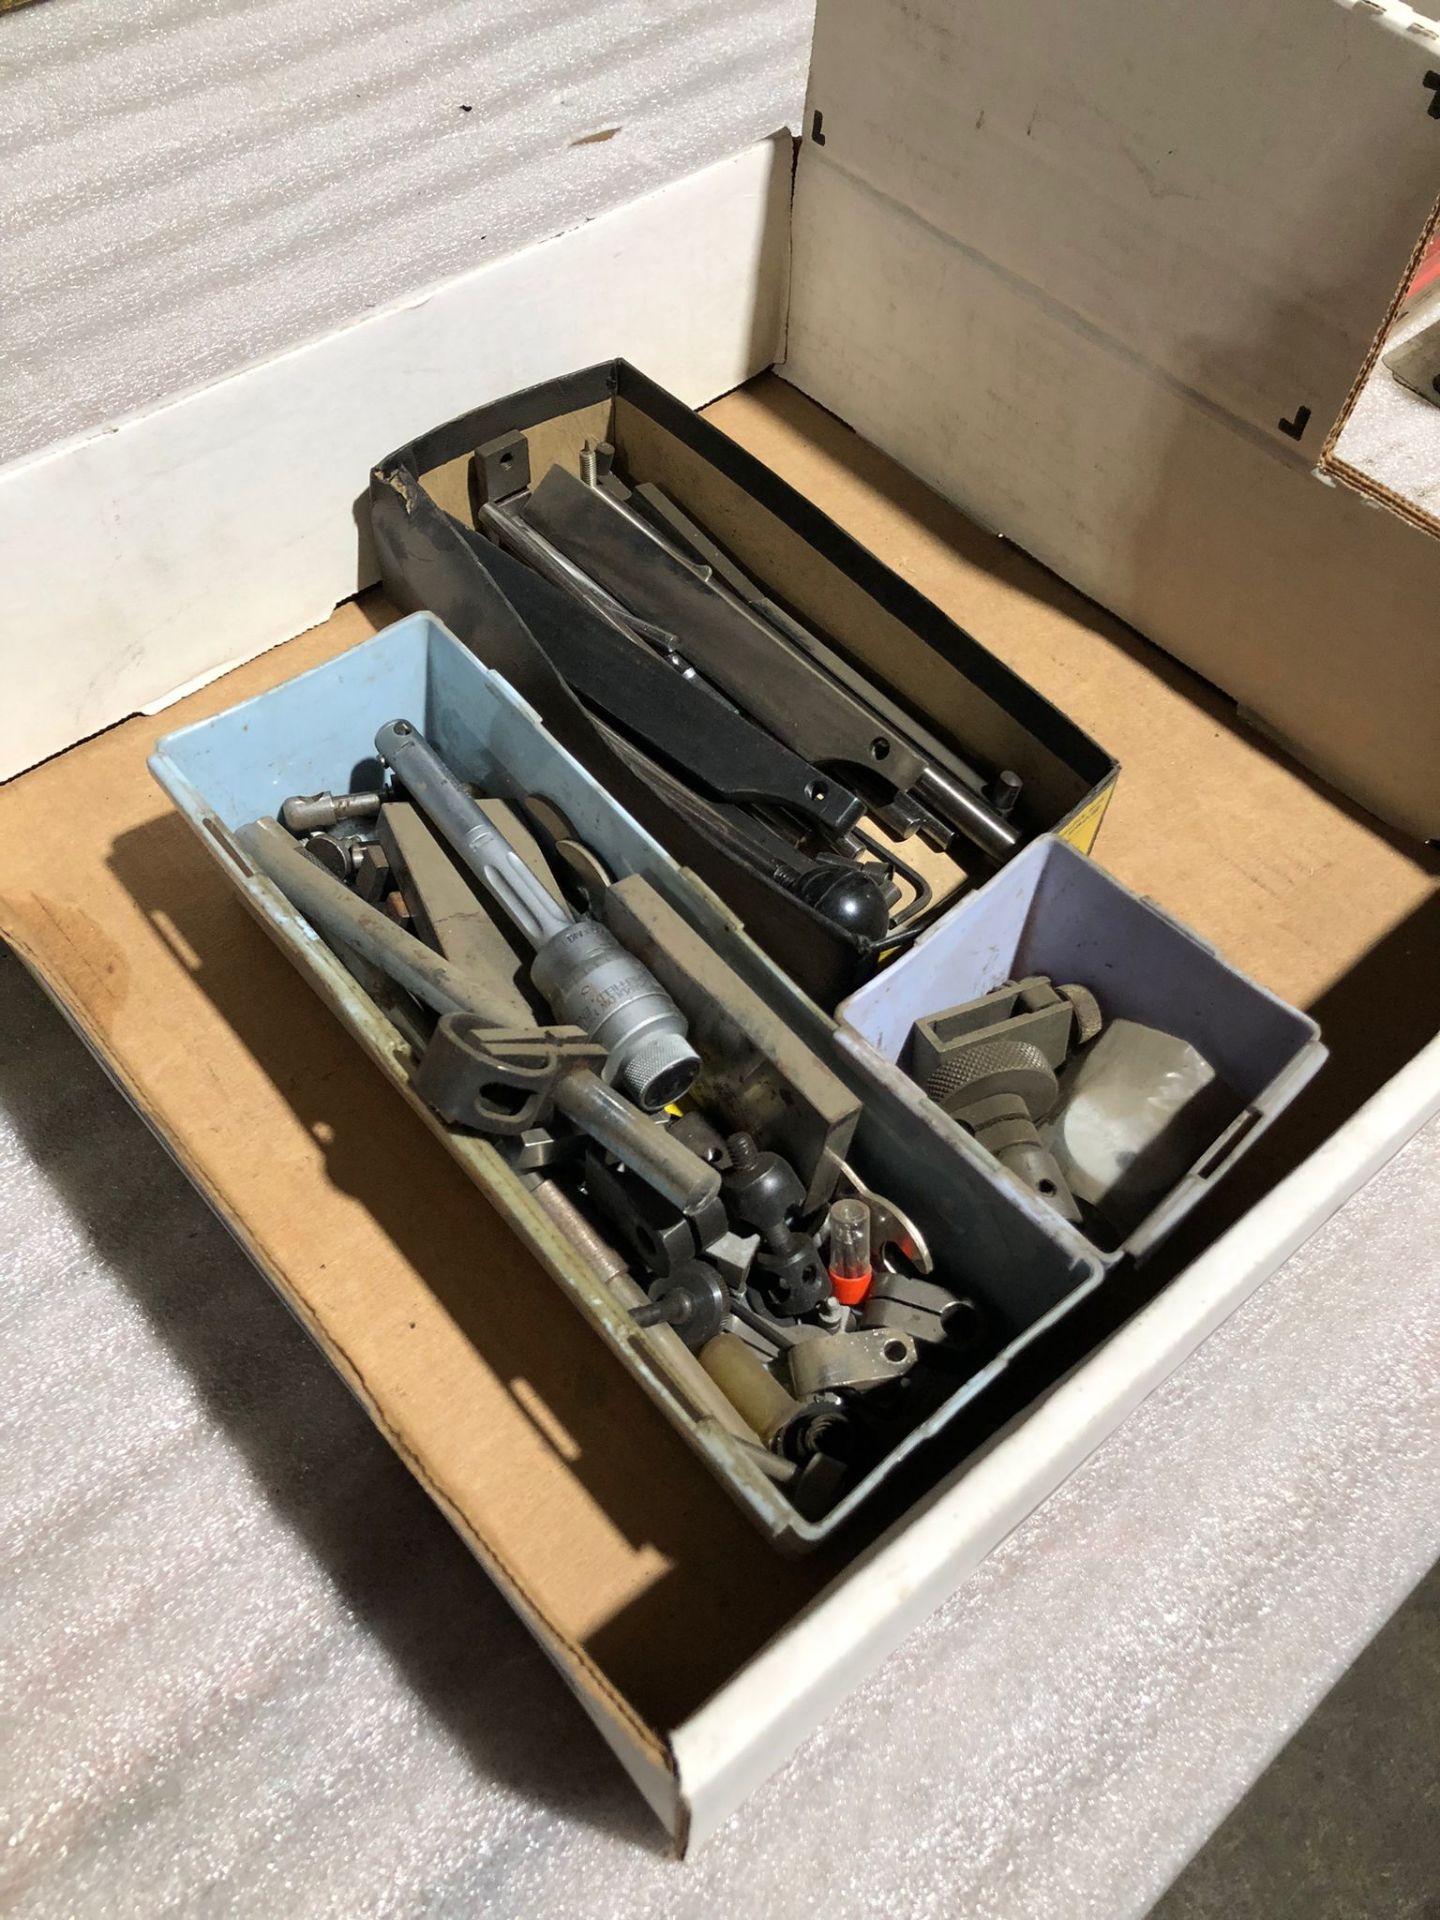 Lot of Levels, Shims and Inside Bore Micrometer